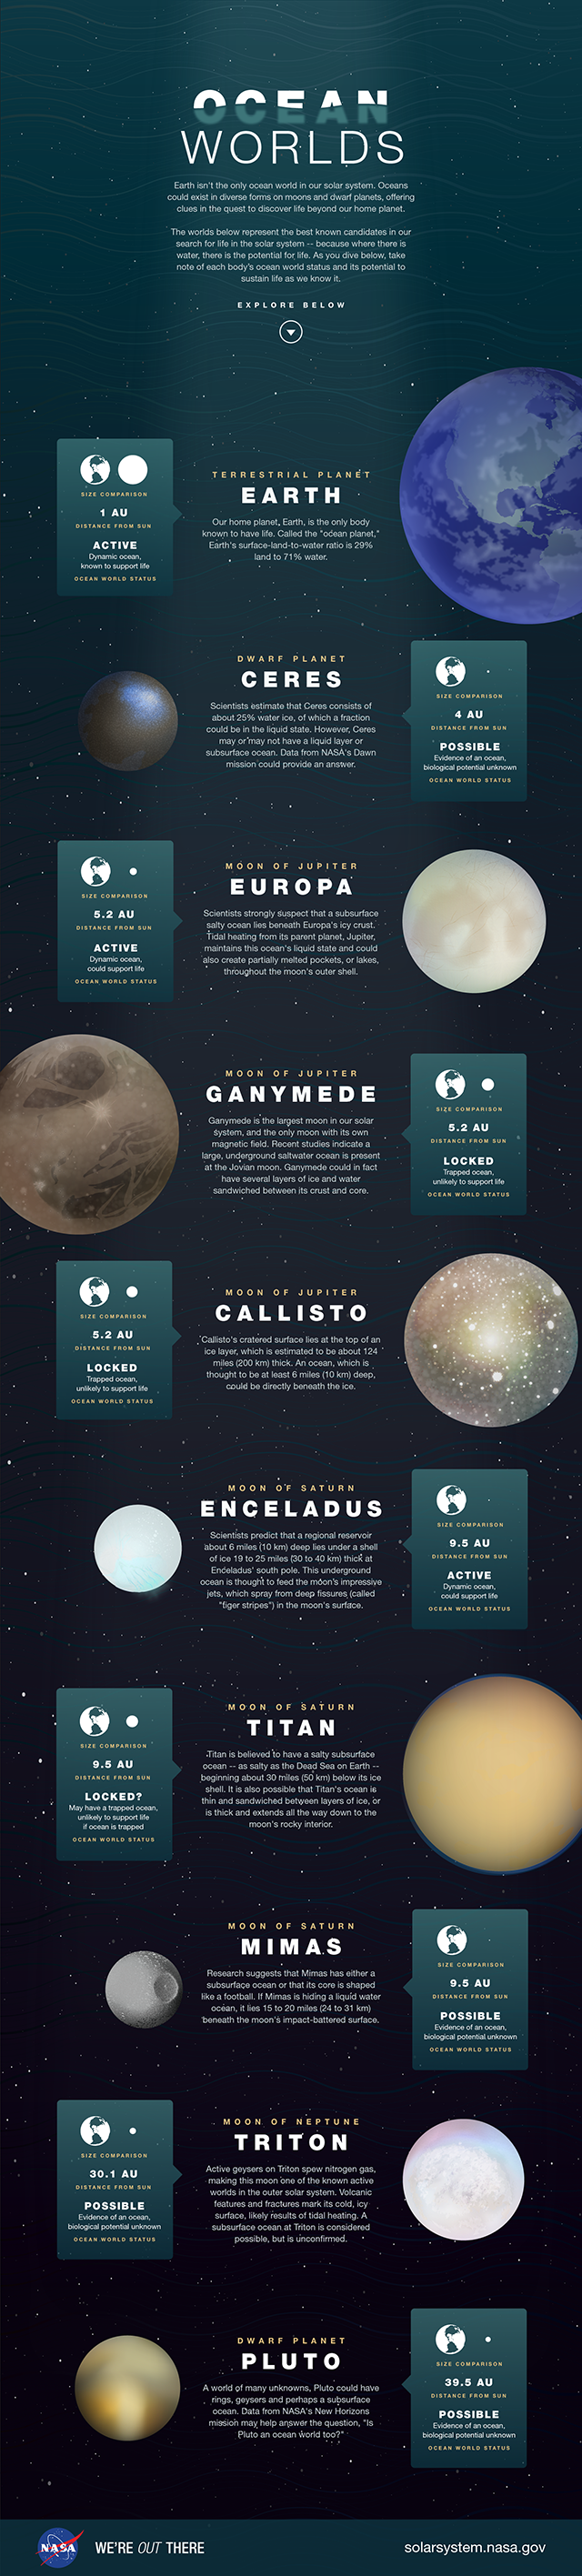 Infographic showing the best-known candidates in our search for life in the solar system. (Credit: NASA)